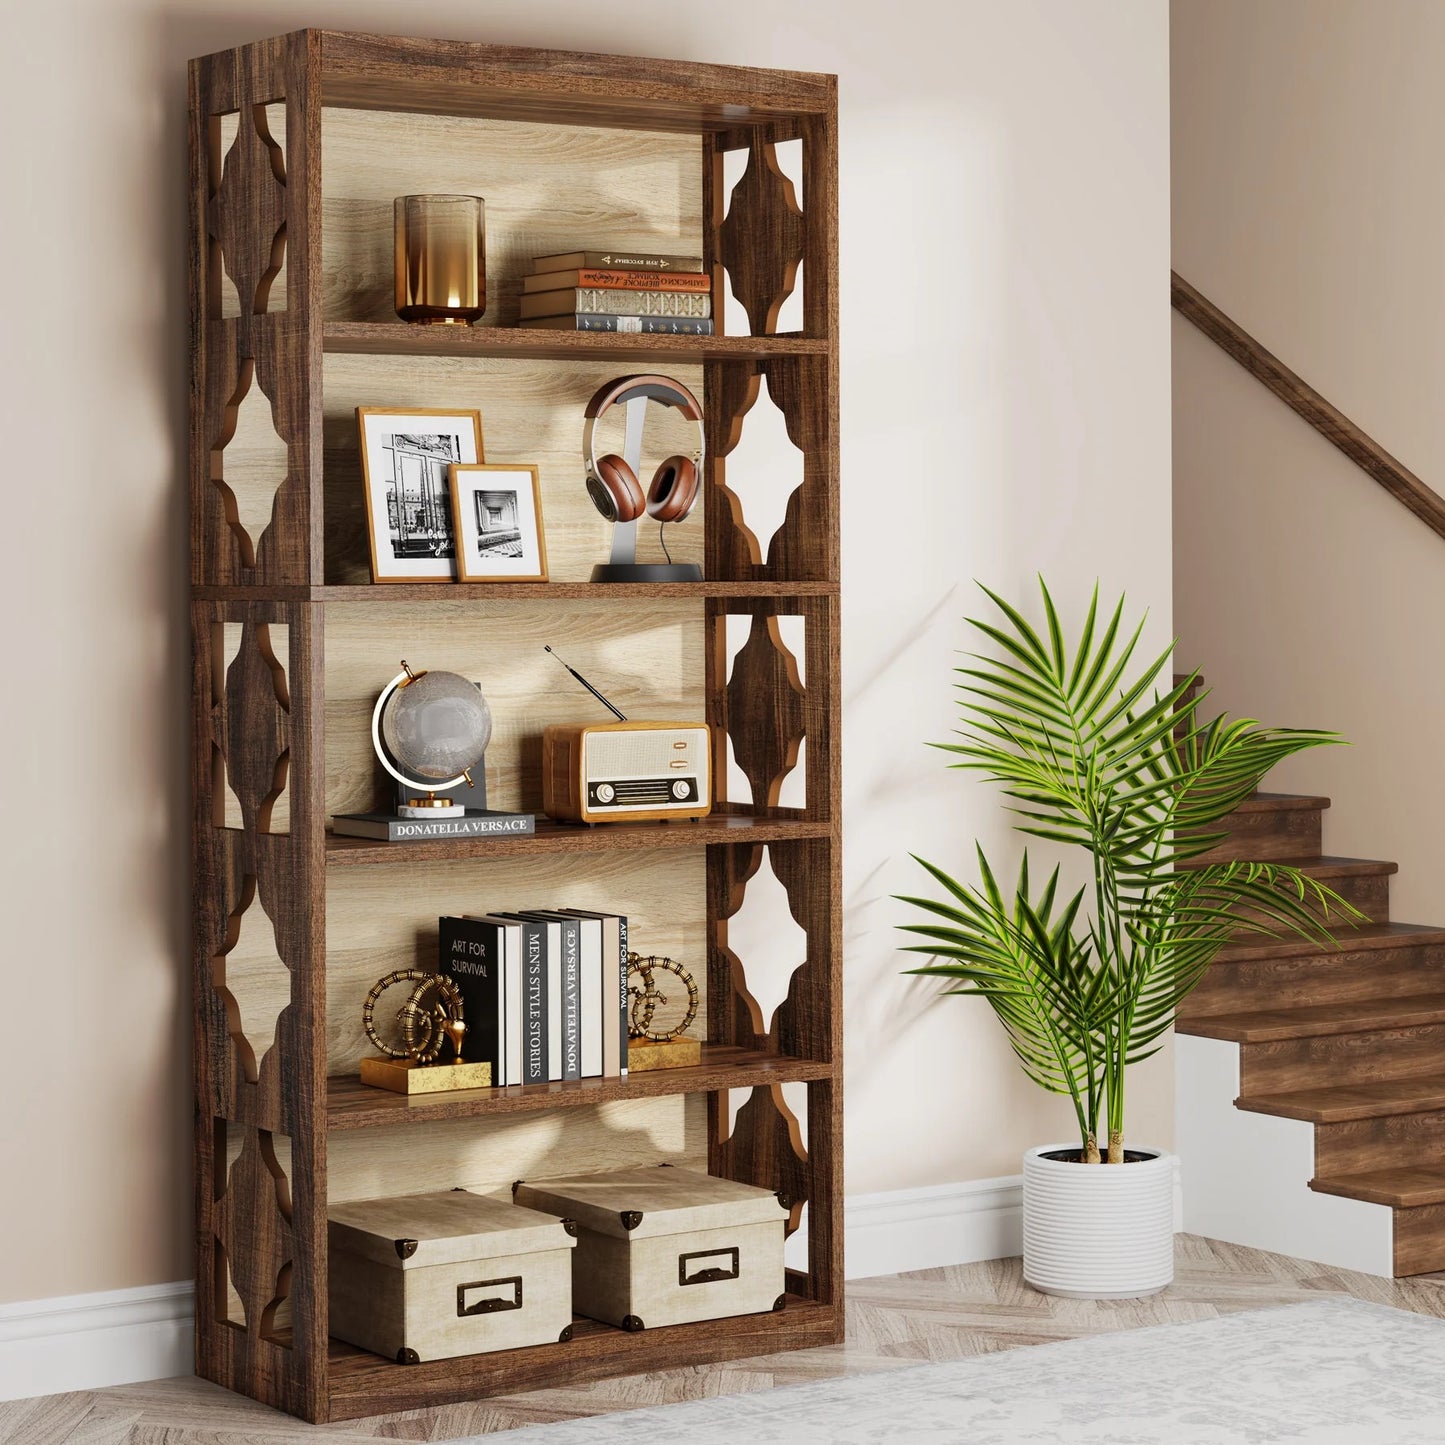 6-Tier Bookshelf, 70-Inch Wood Bookcase with Storage Shelves